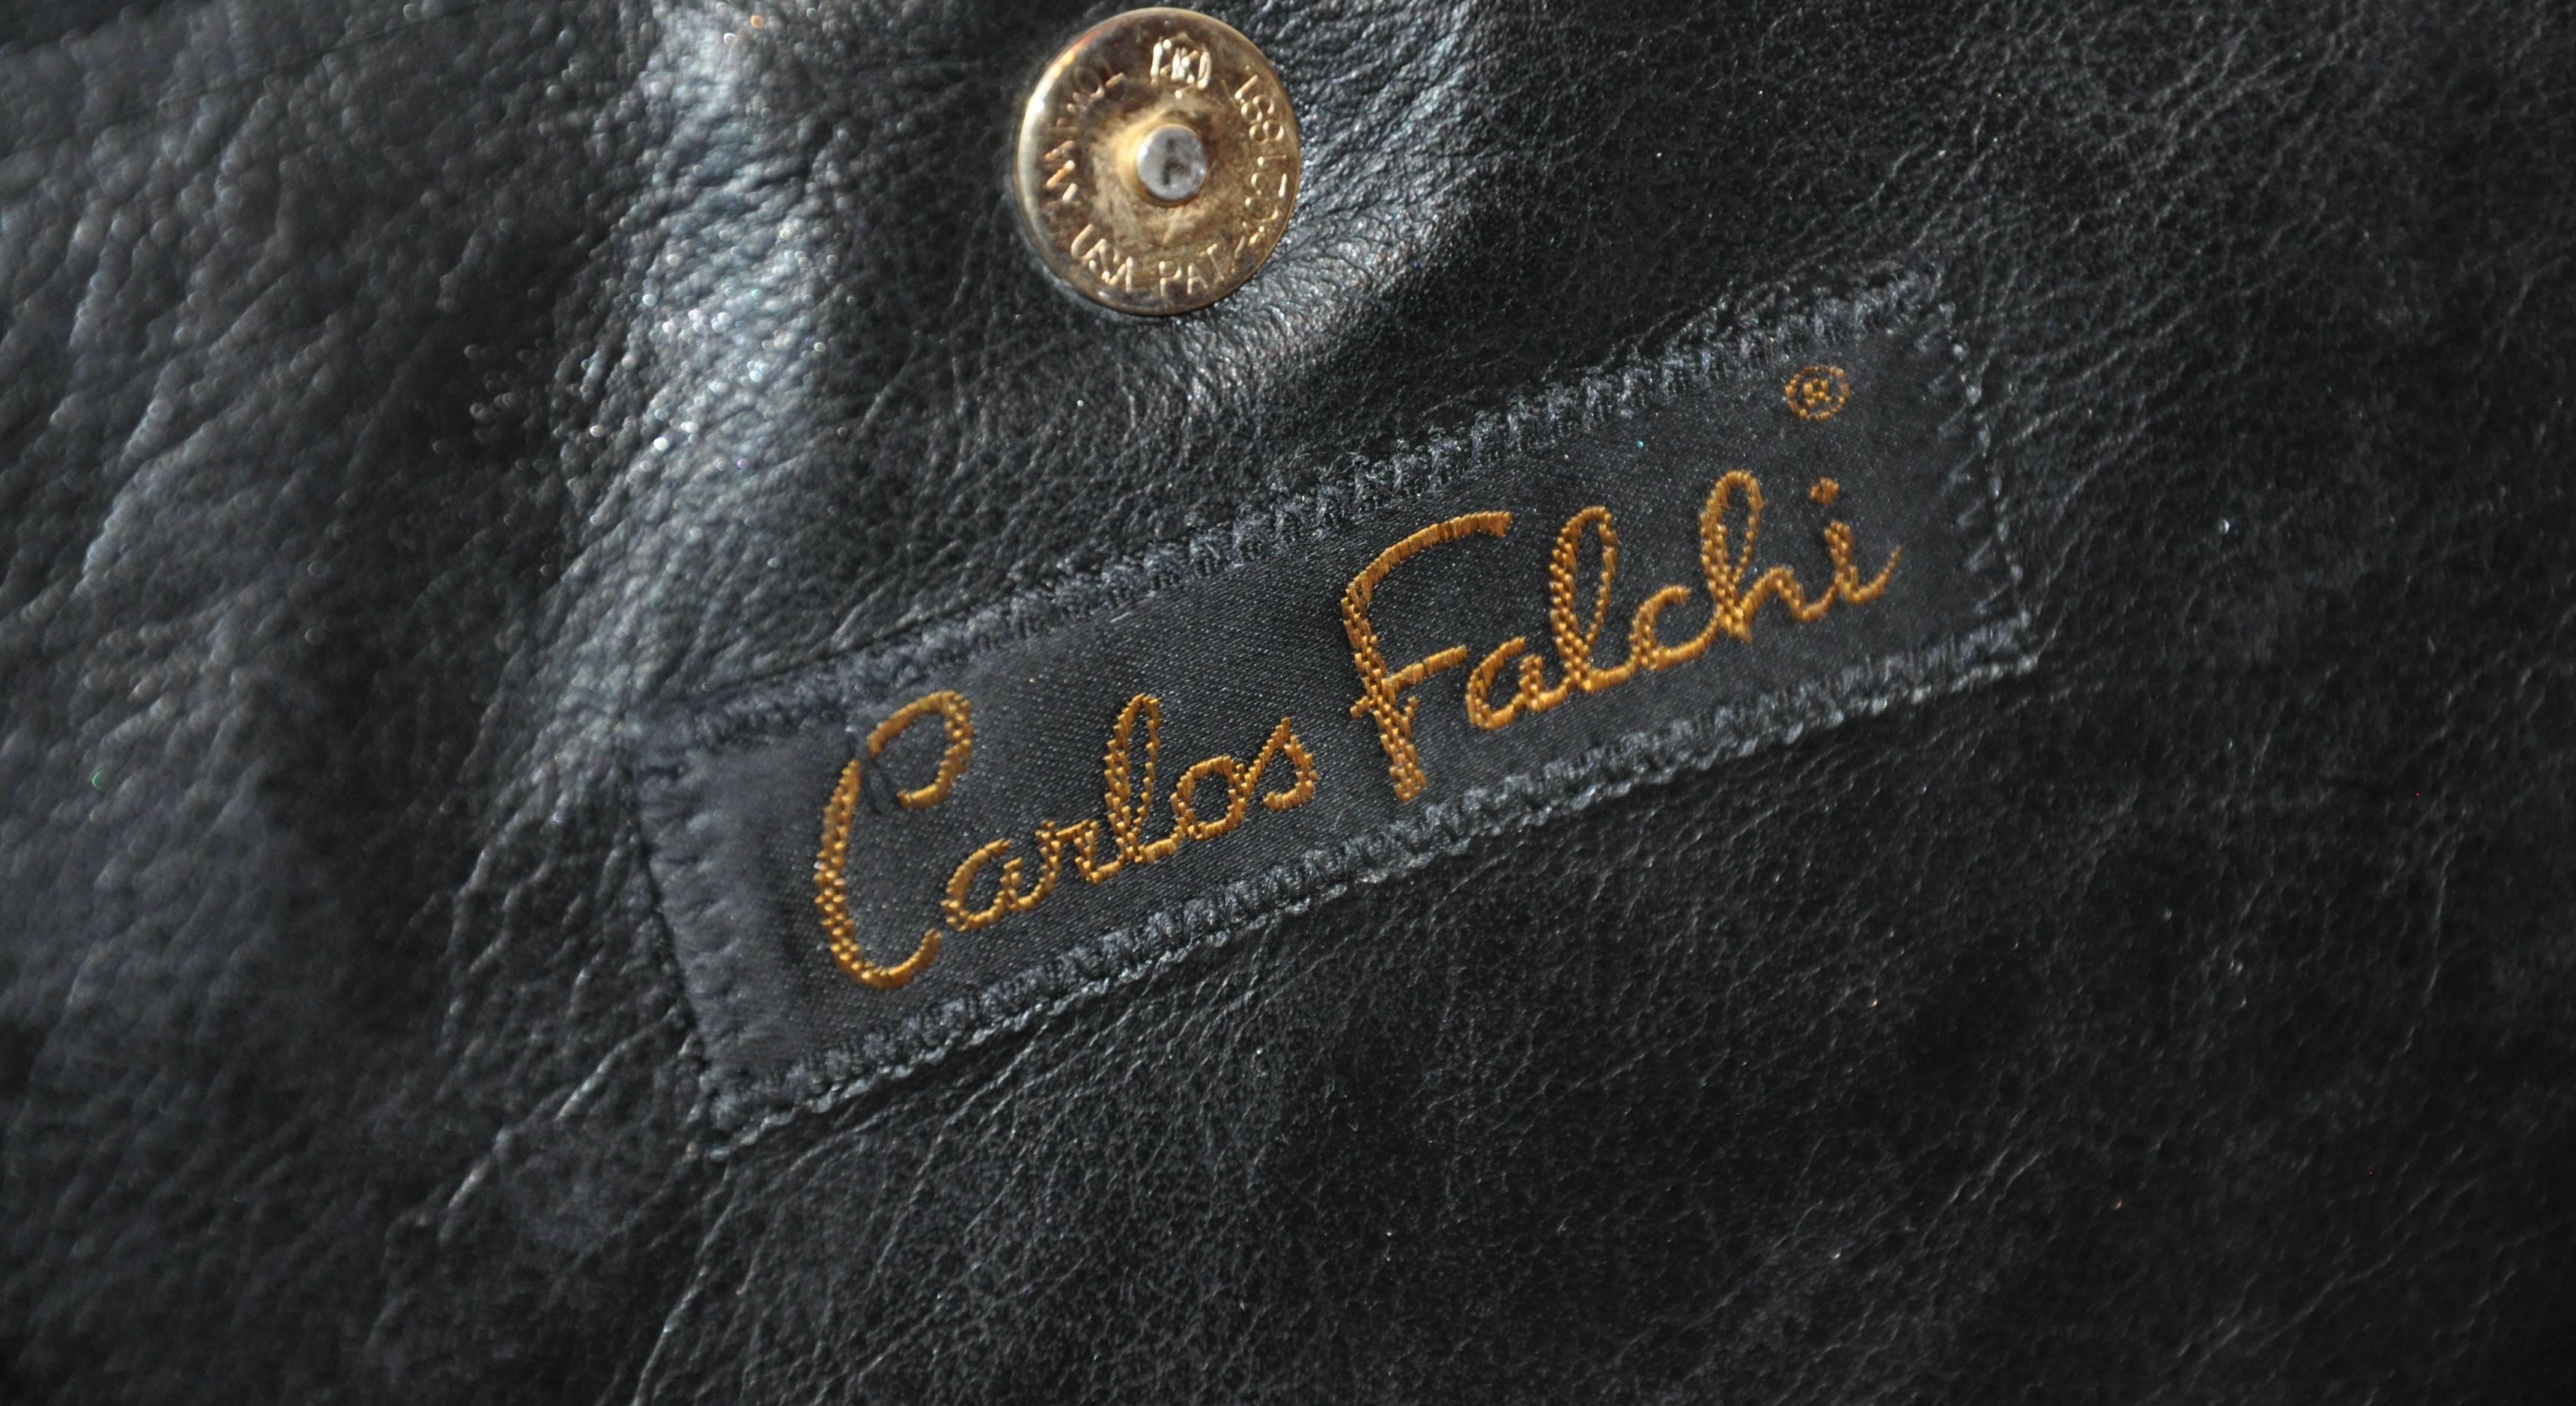 Carlos Falchi Black & Gold Embossed Alligator Calfskin Clutch/ Shoulder Bag In Good Condition For Sale In New York, NY